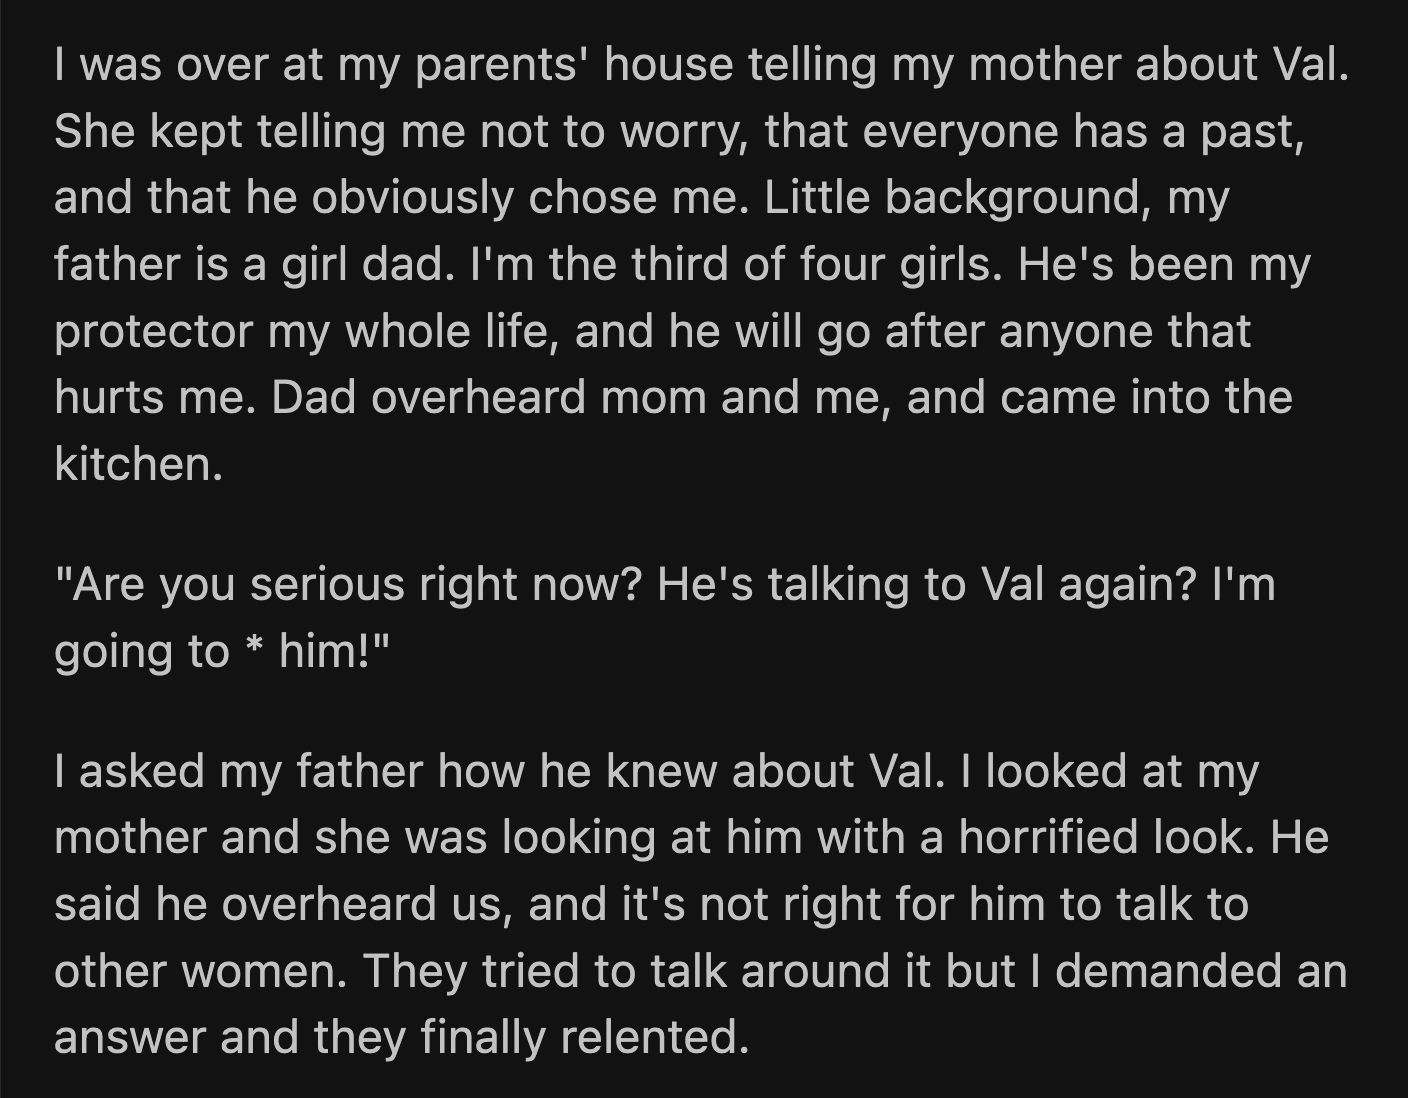 OP visited her parents and talked to her mom about her discoveries. Her dad overheard and had bizarre reaction as if he knew who Val was.